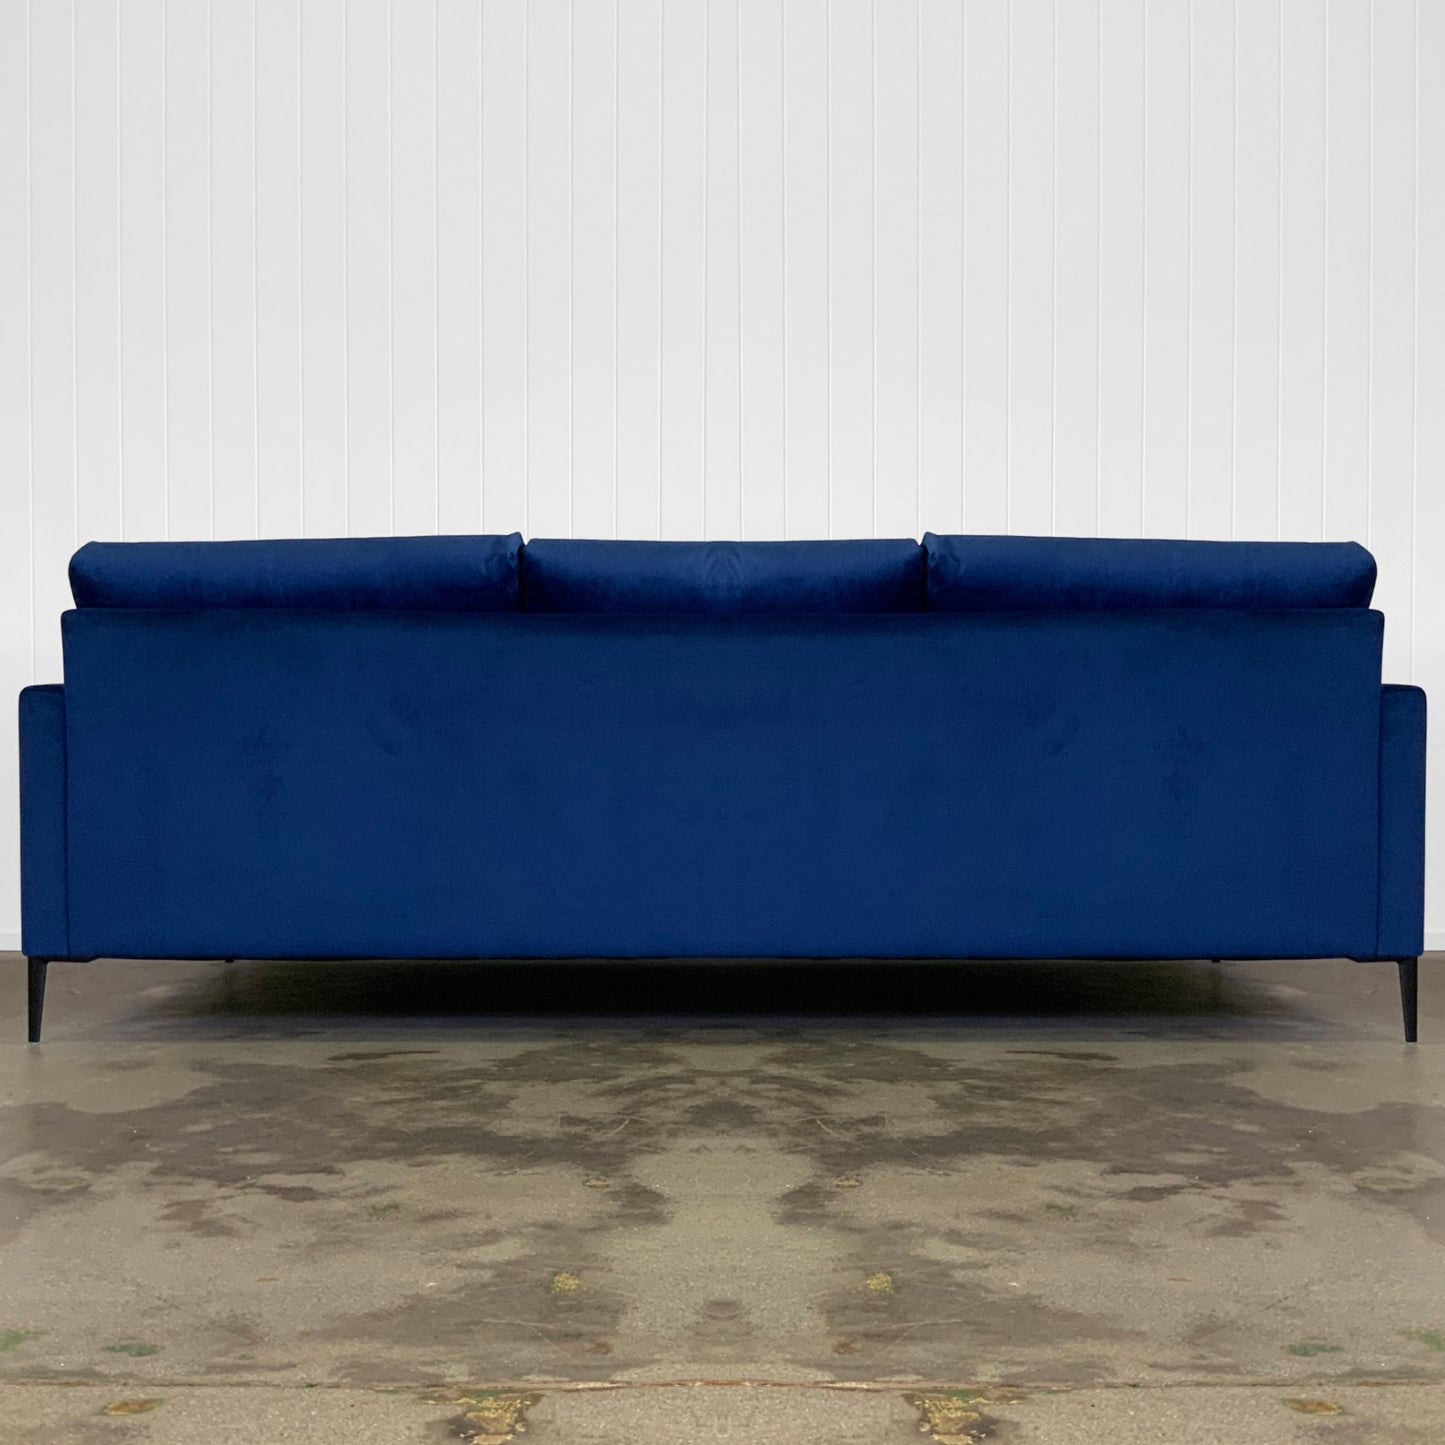 N.Y.C. LOFT SOFA | MID RANGE FABRICS | MULTIPLE SIZES AND OPTIONS AVAILABLE | MADE TO ORDER IN WA